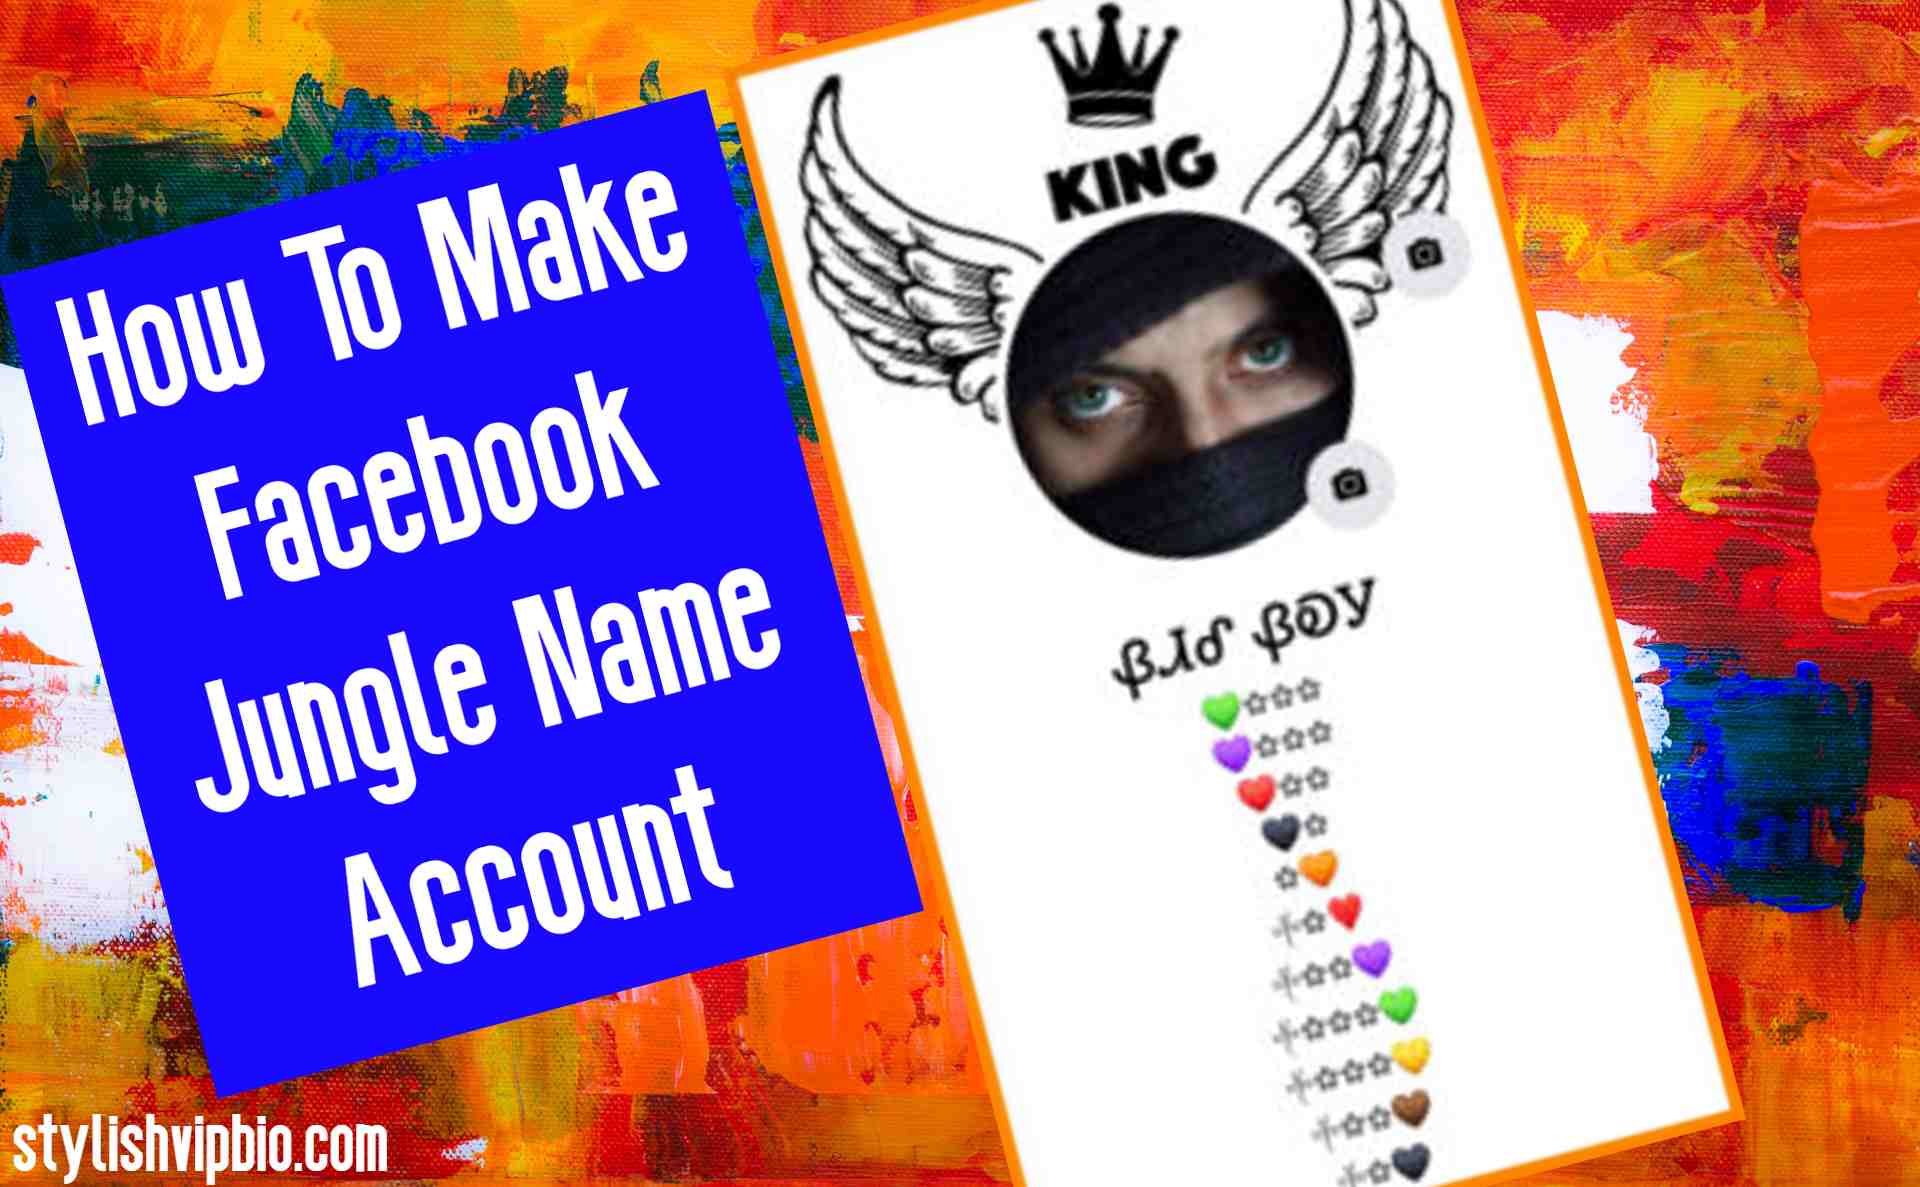 How To Make Facebook Jungle Name Account